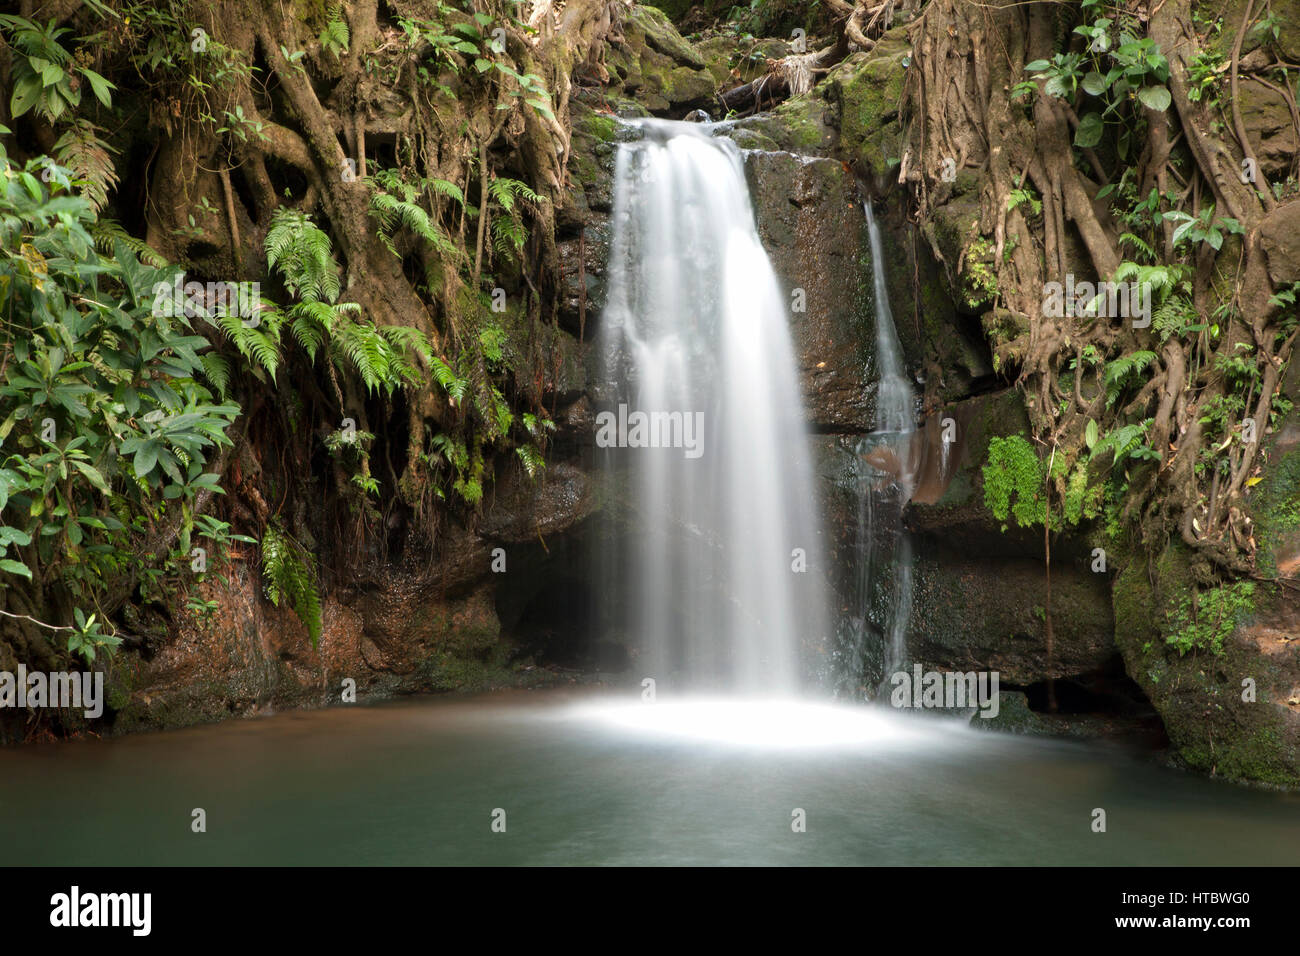 Waterfall in tropical forest, Costa Rica Stock Photo